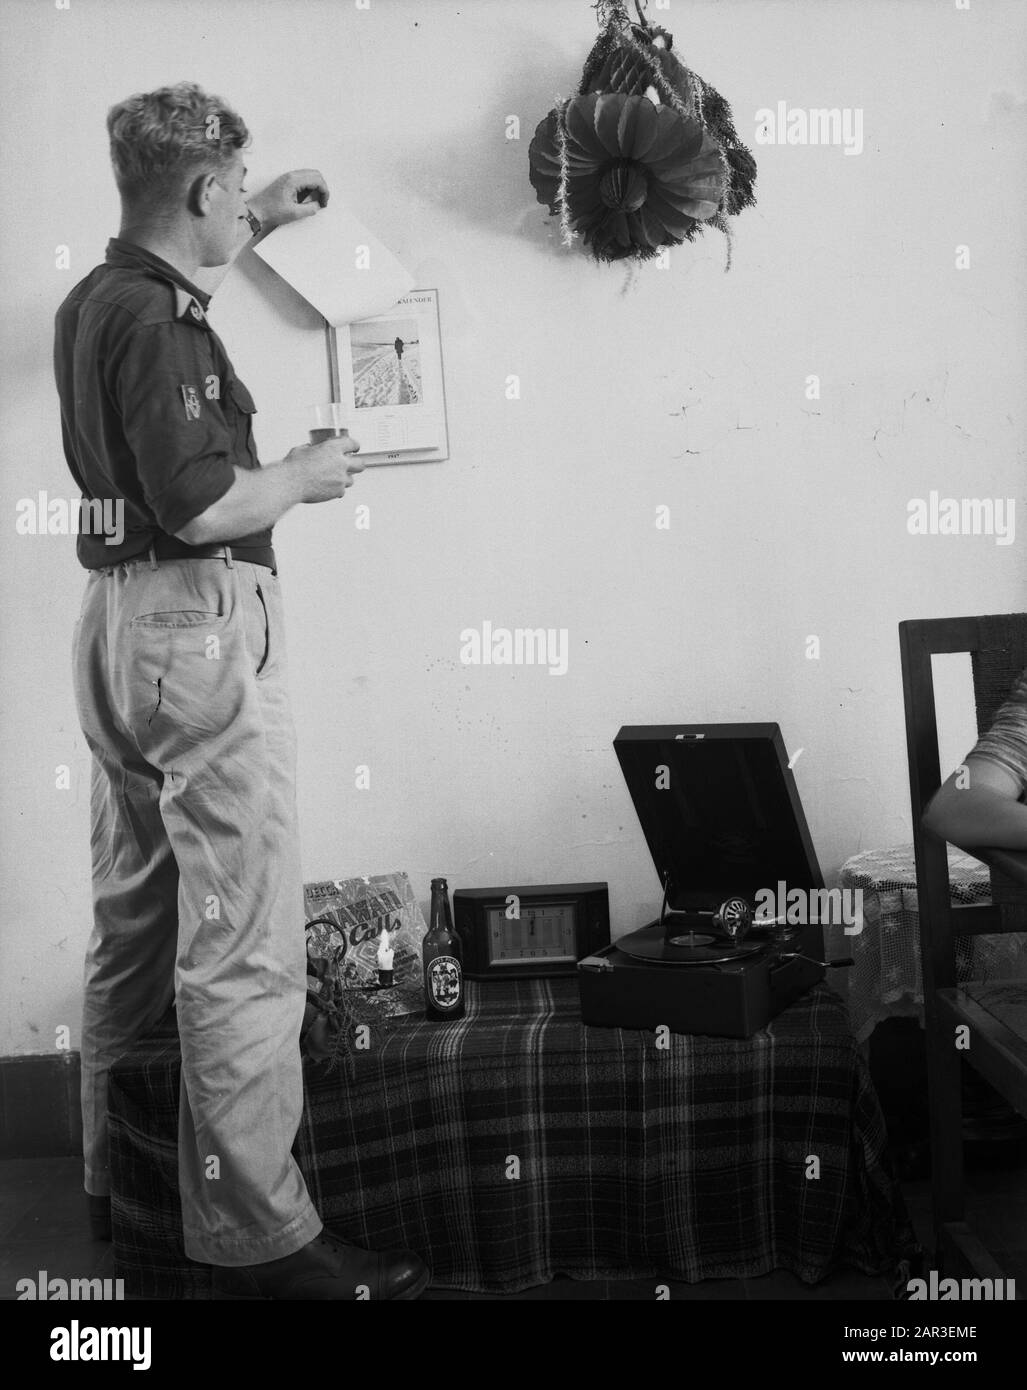 Man in uniform with sleeve emblem War Volunteer KL tears off a sheet of a calendar of the year 1947. Posted photo Date: 1947/01/01 Location: Indonesia, Dutch East Indies Stock Photo